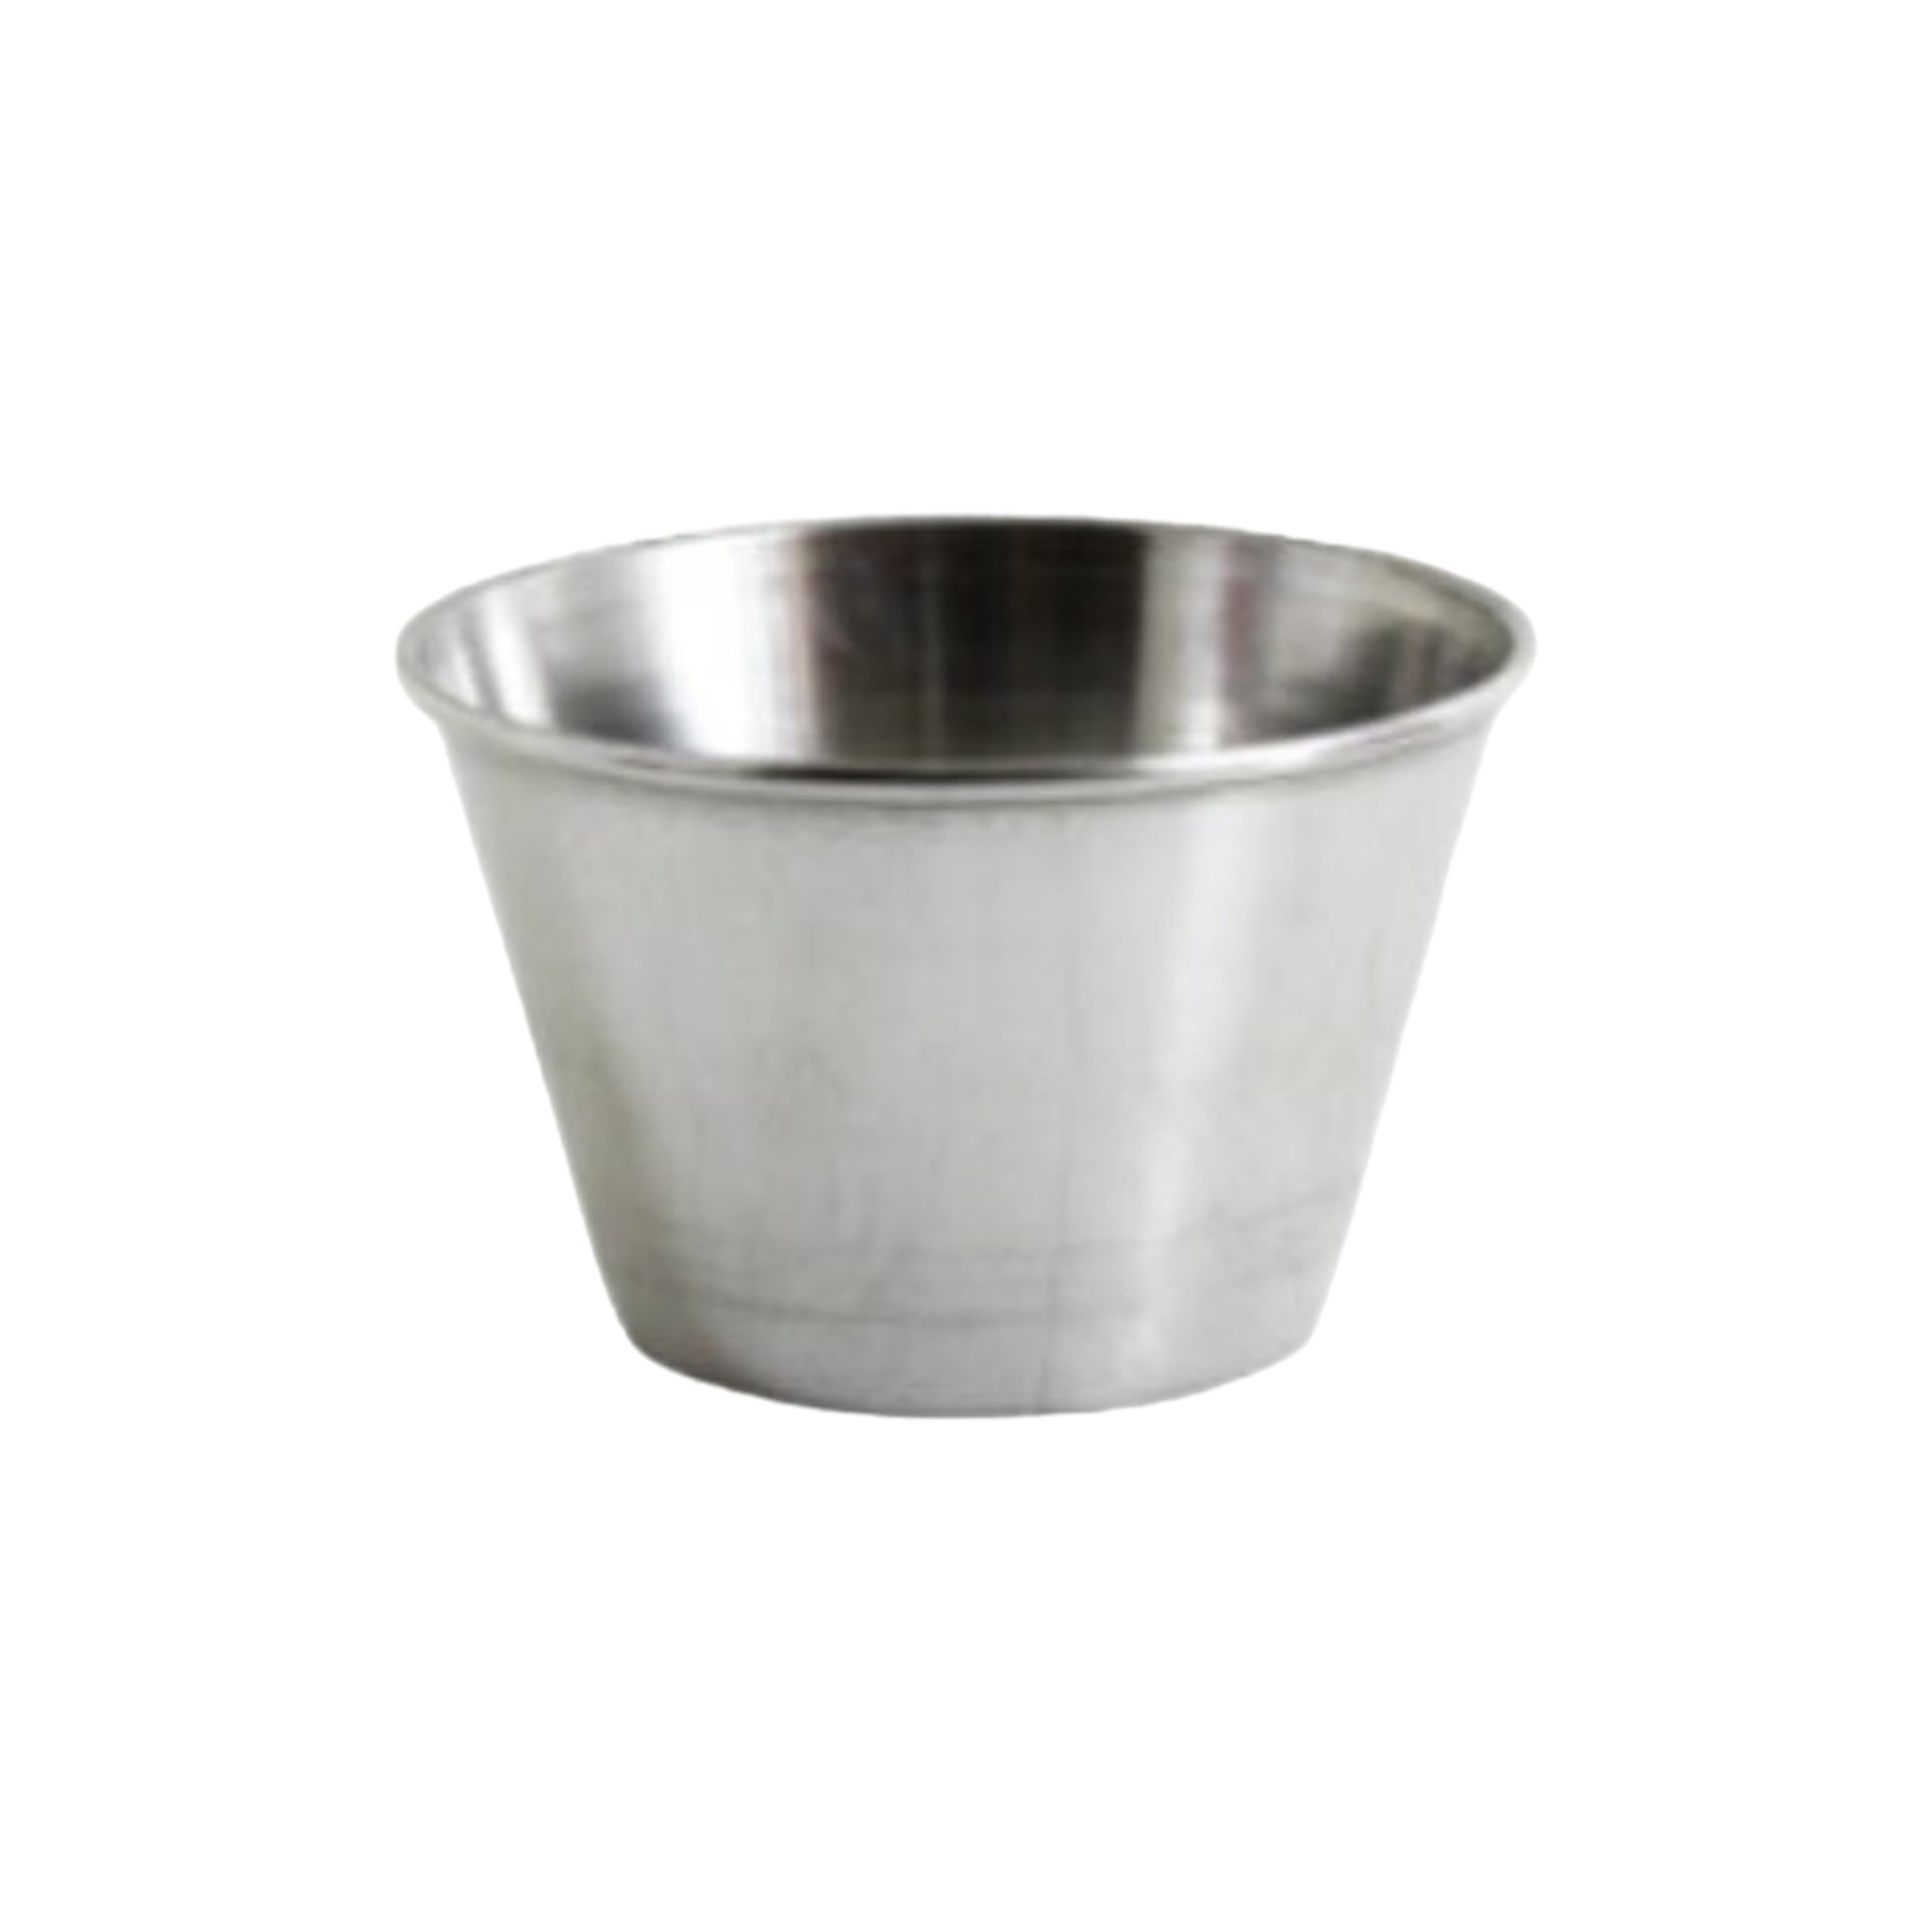 Stainless Steel Sauce Cup 8oz 235ml MV3279